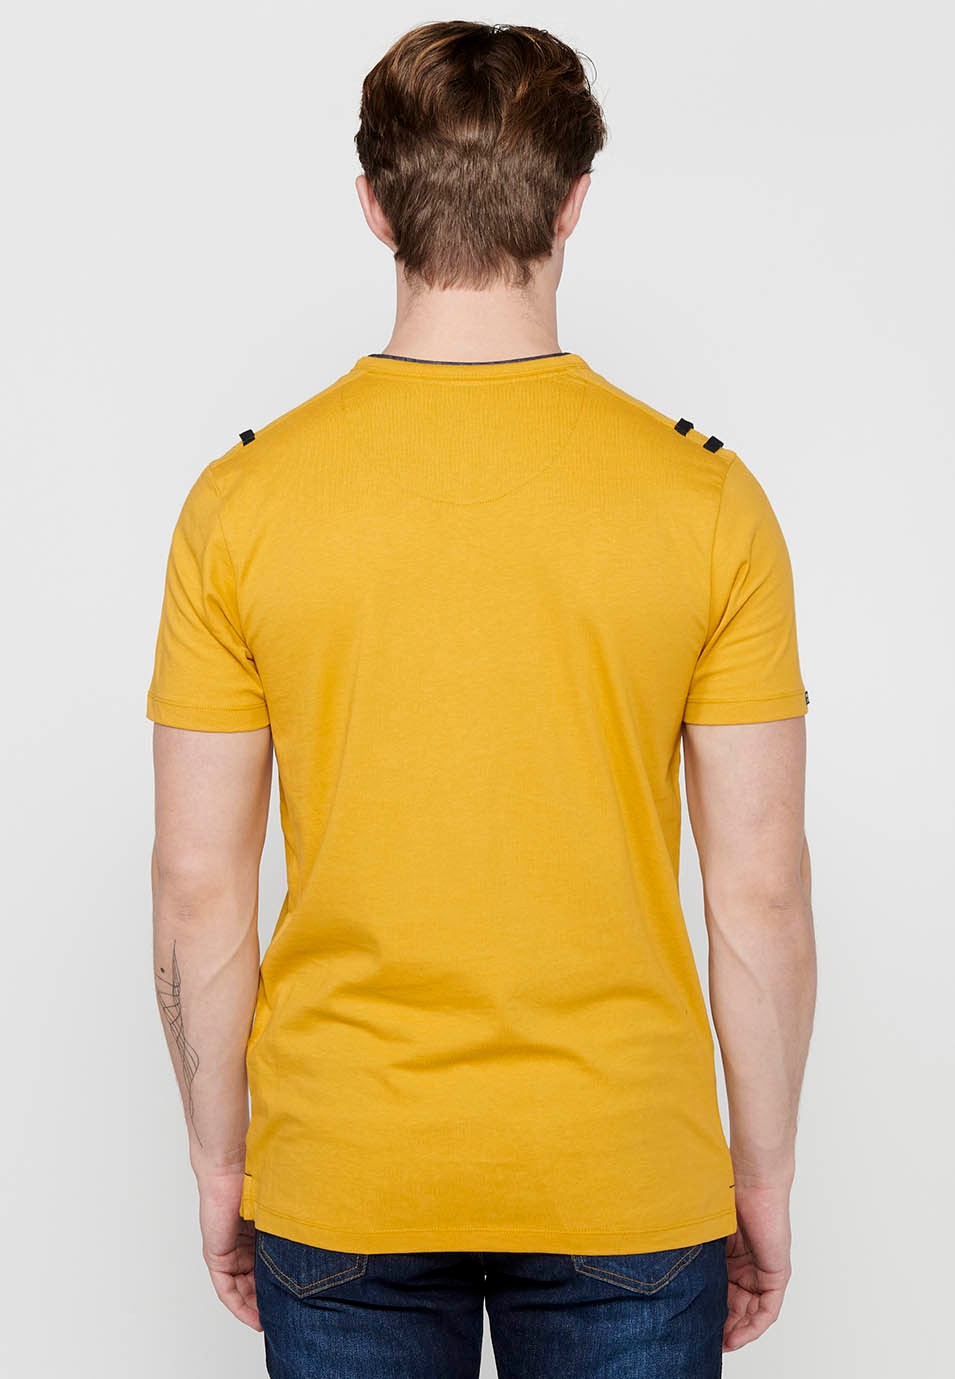 Men's Yellow Short Sleeve Round Neck Cotton T-Shirt with Buttoned Opening 7